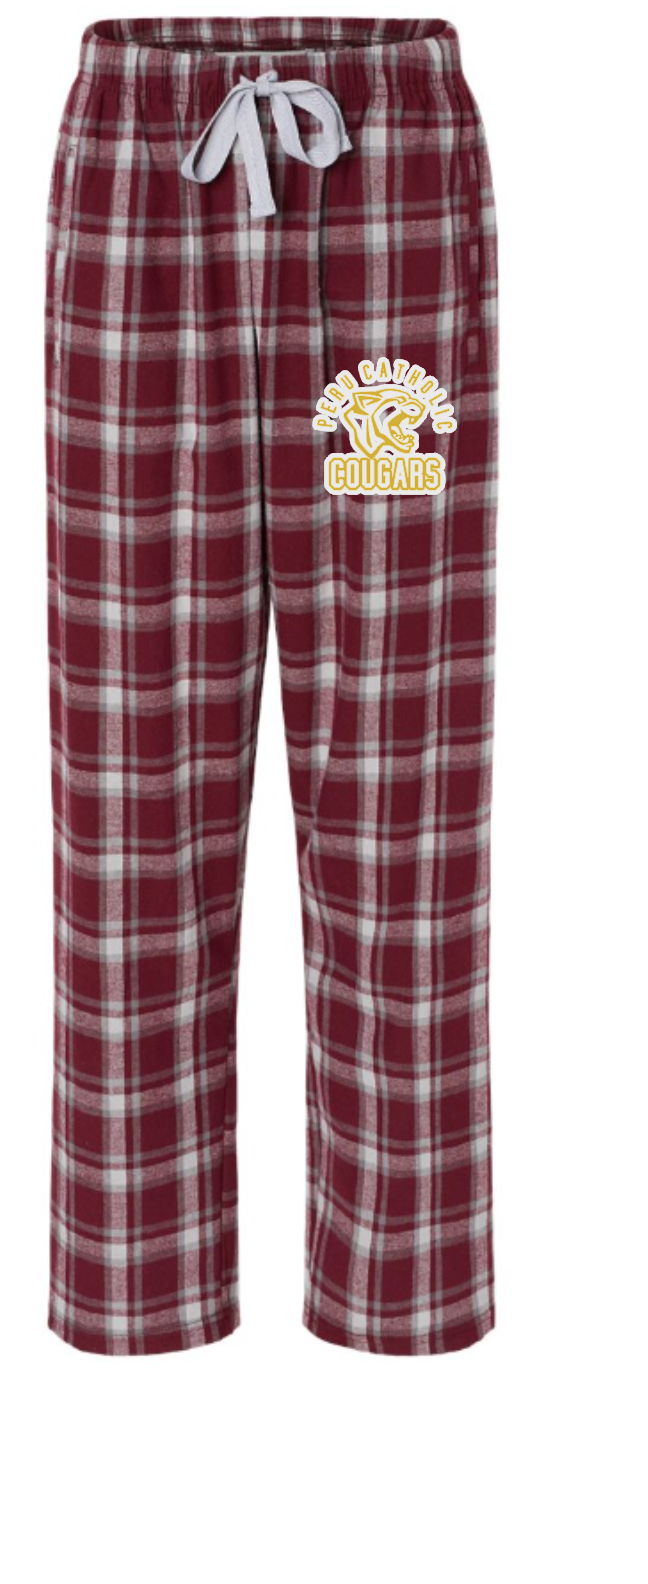 Cougars flannel pants